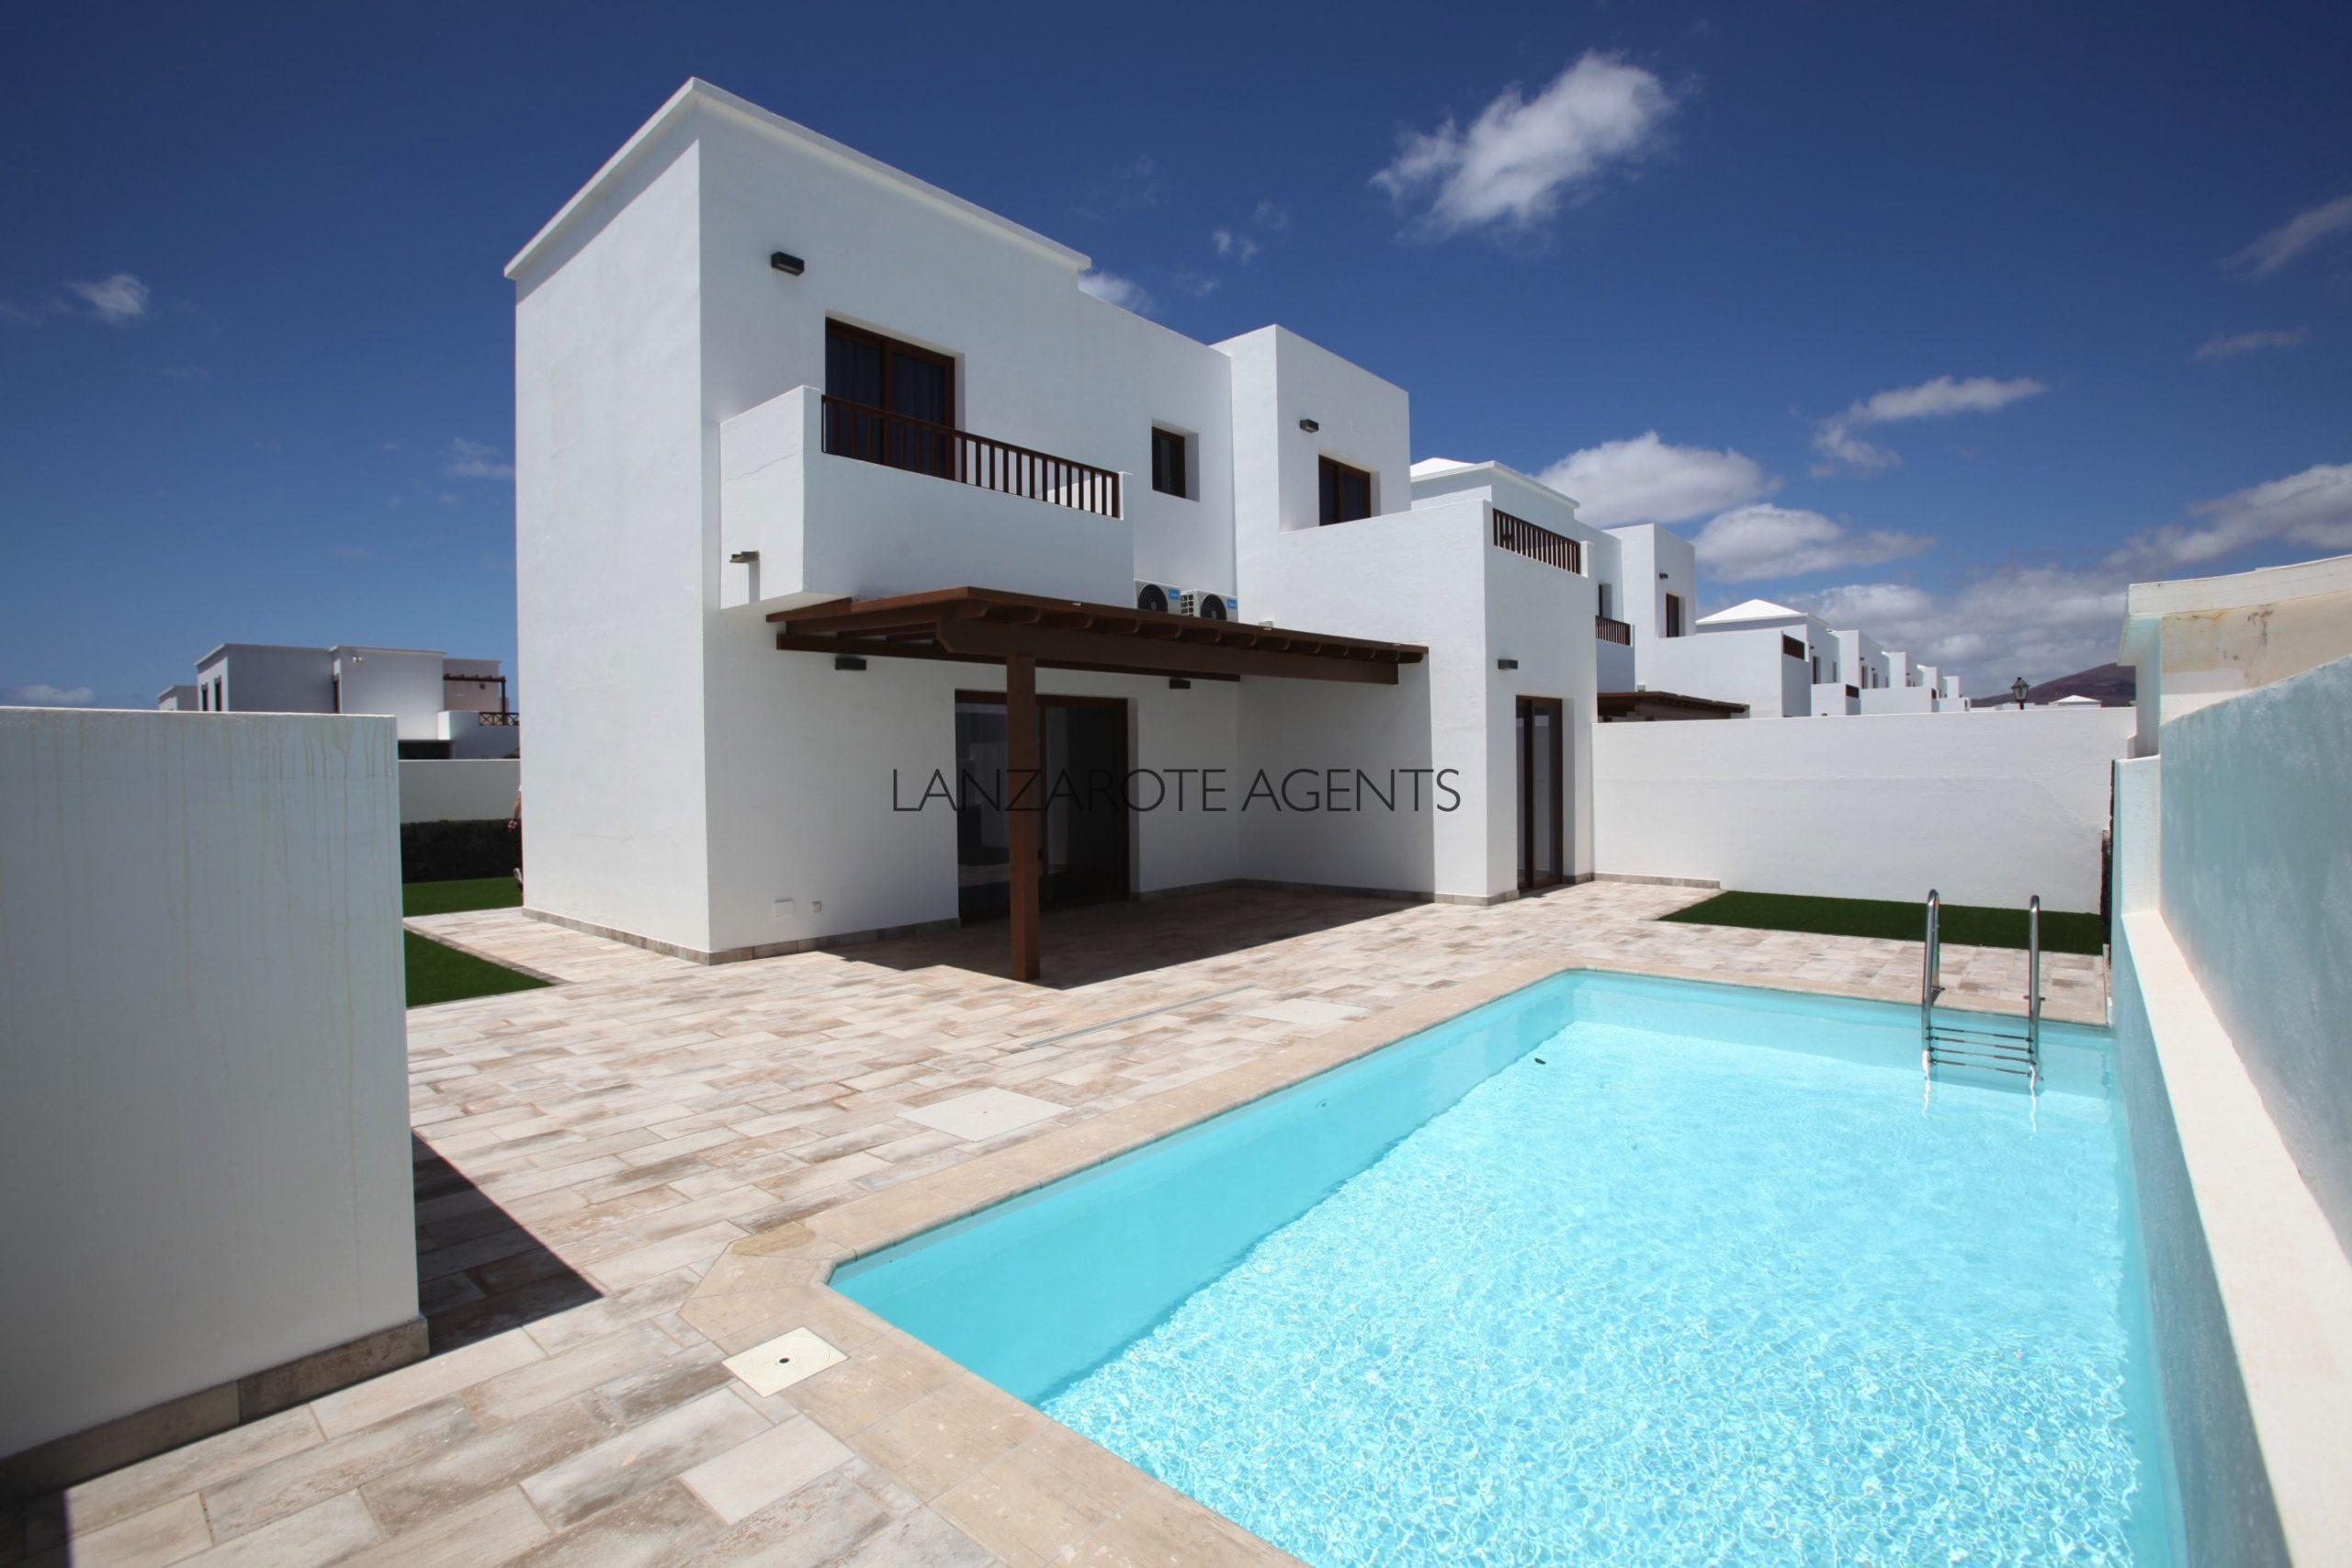 Detached 3 Bedroom Villa in Lanzarote Near Marina Rubicon Fully Refurbished with Private Pool